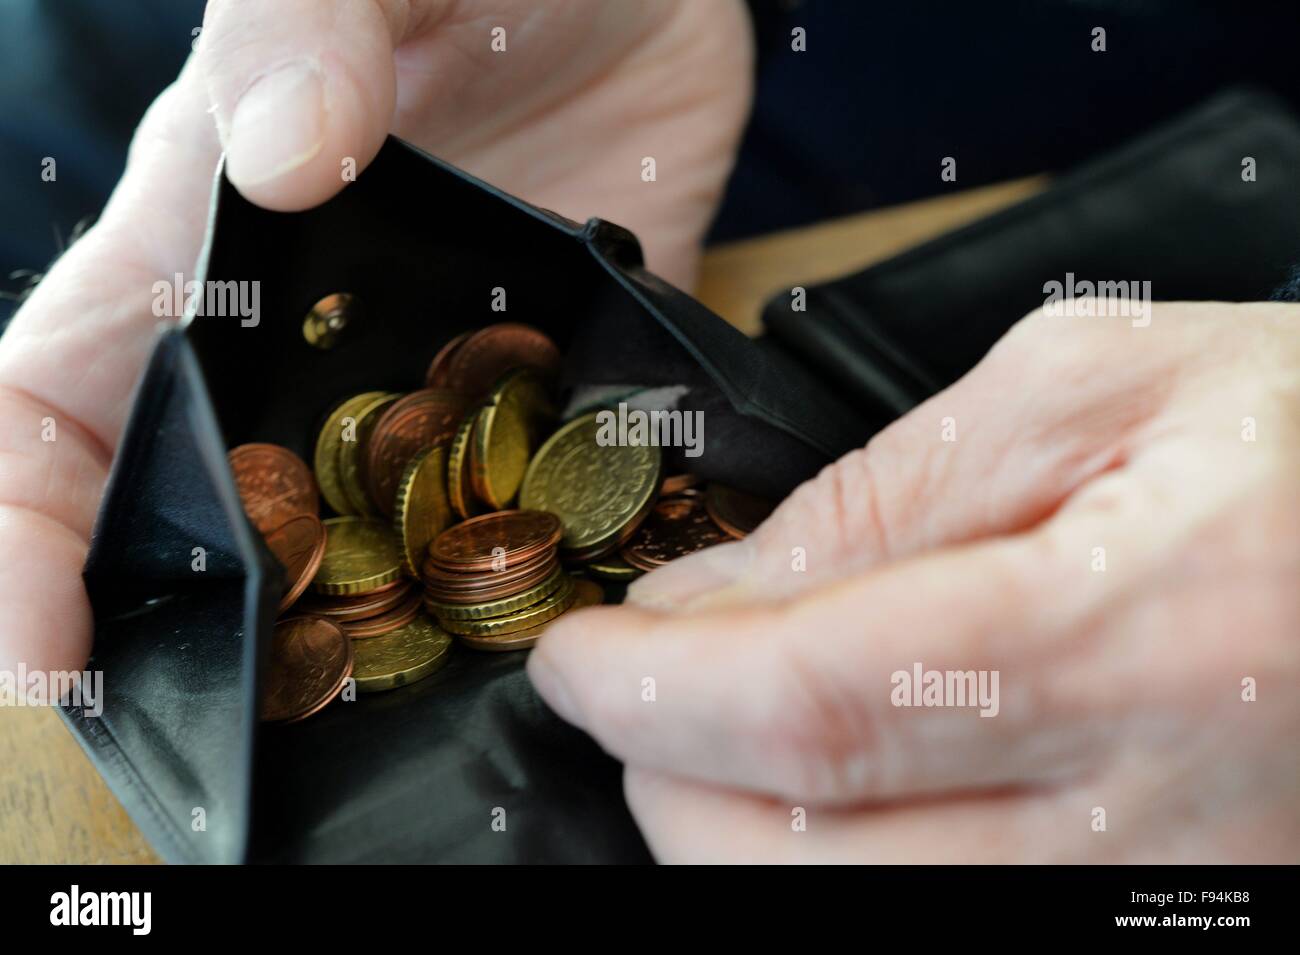 Elderly man counting his money, Germany, city of Osterode, 10. December 2015. Photo: Frank May Stock Photo